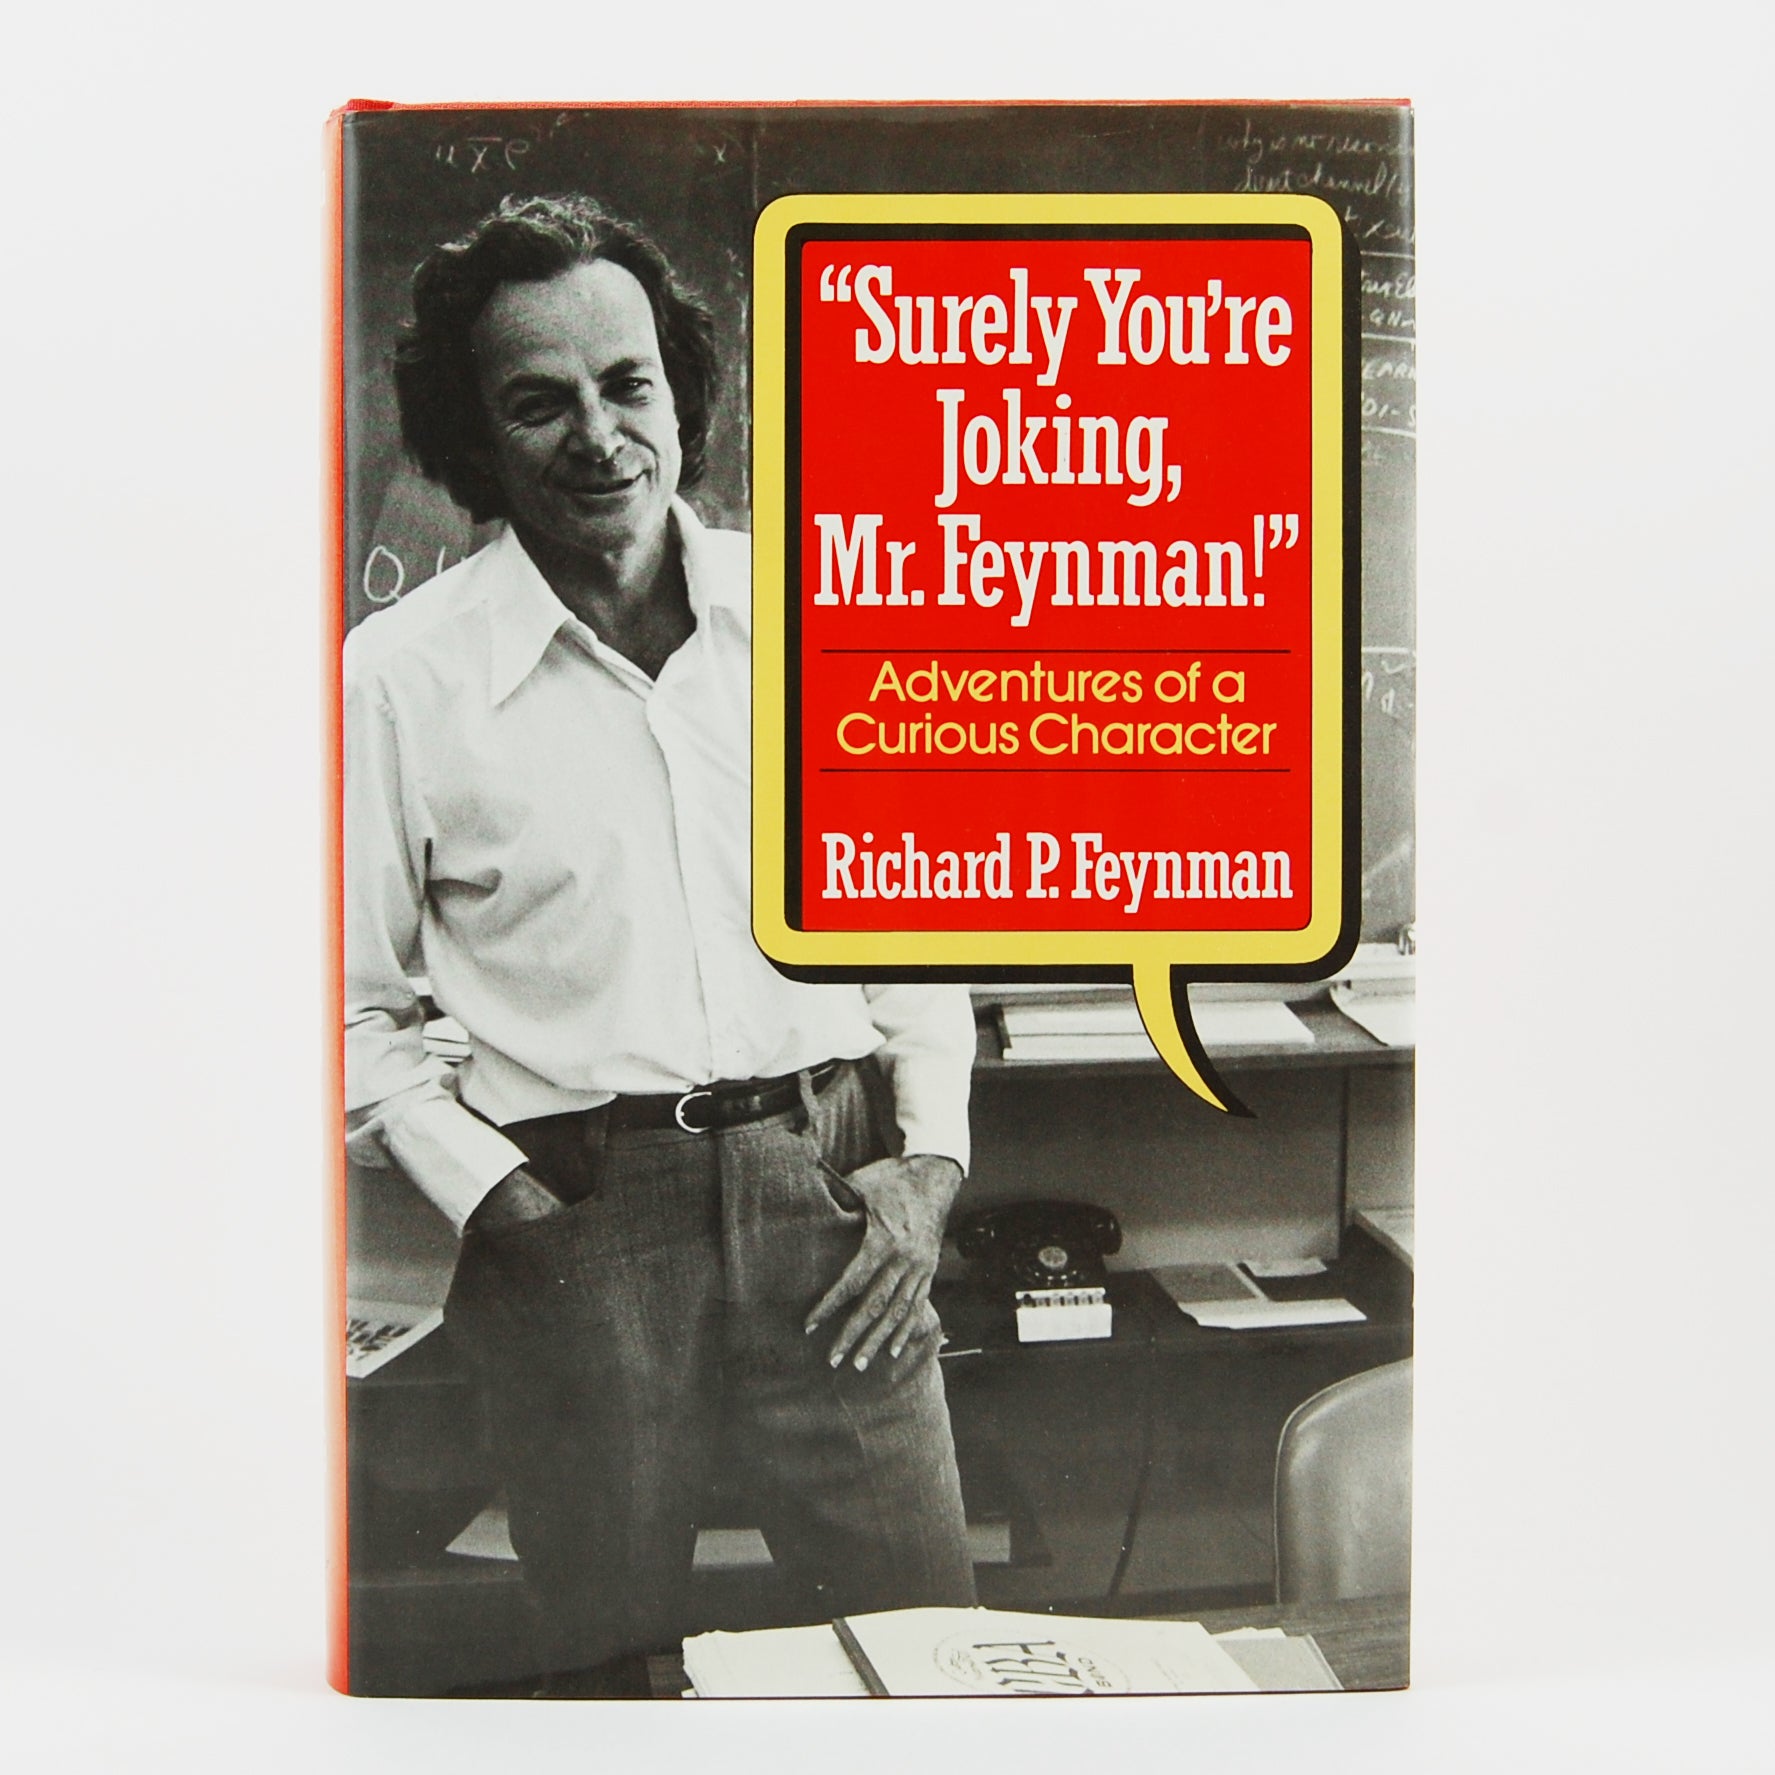 "Surely You're Joking Mr. Feynman!" The Birth of a Classic.